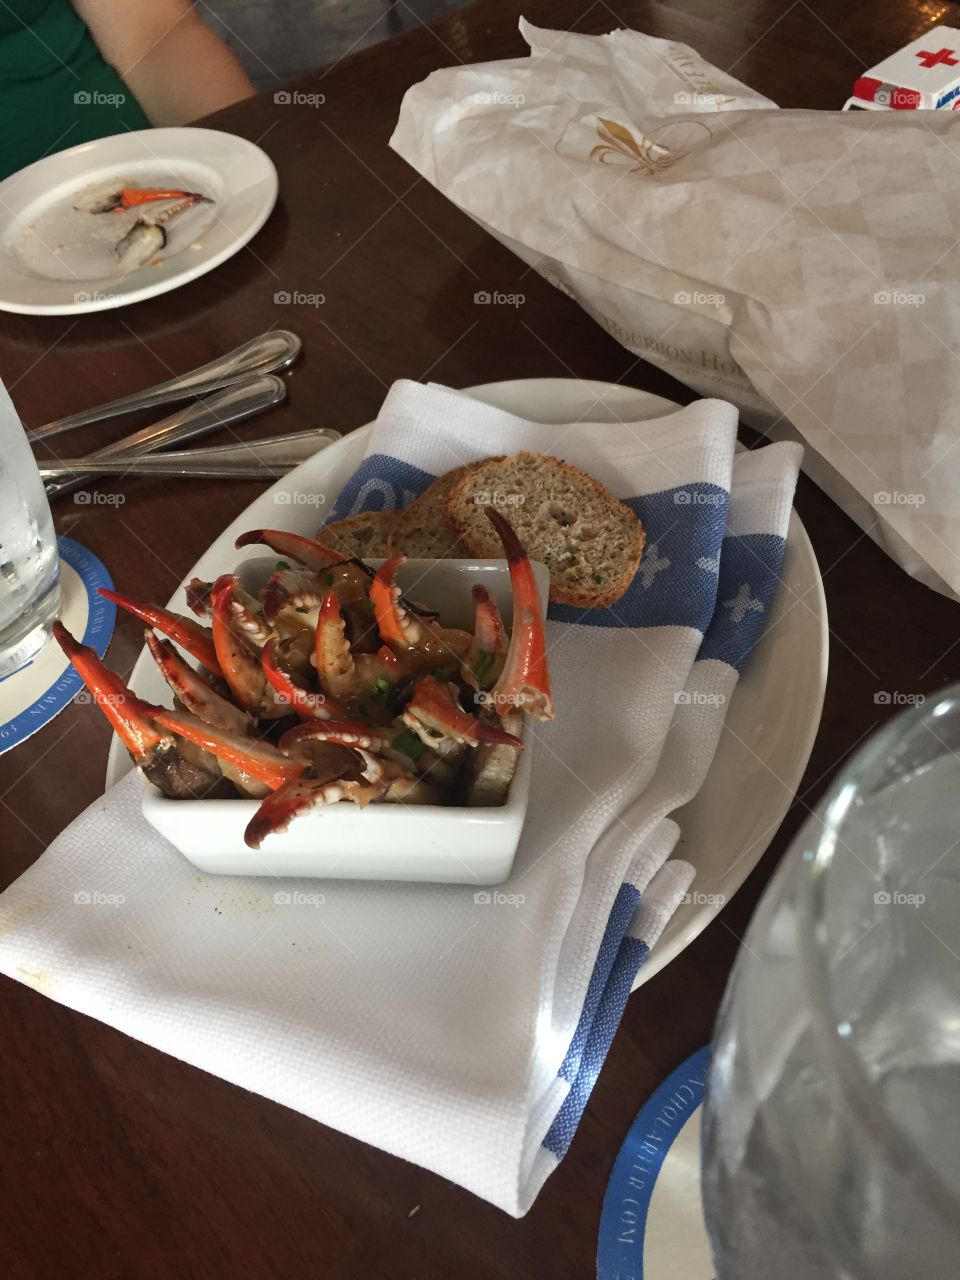 Crab claws